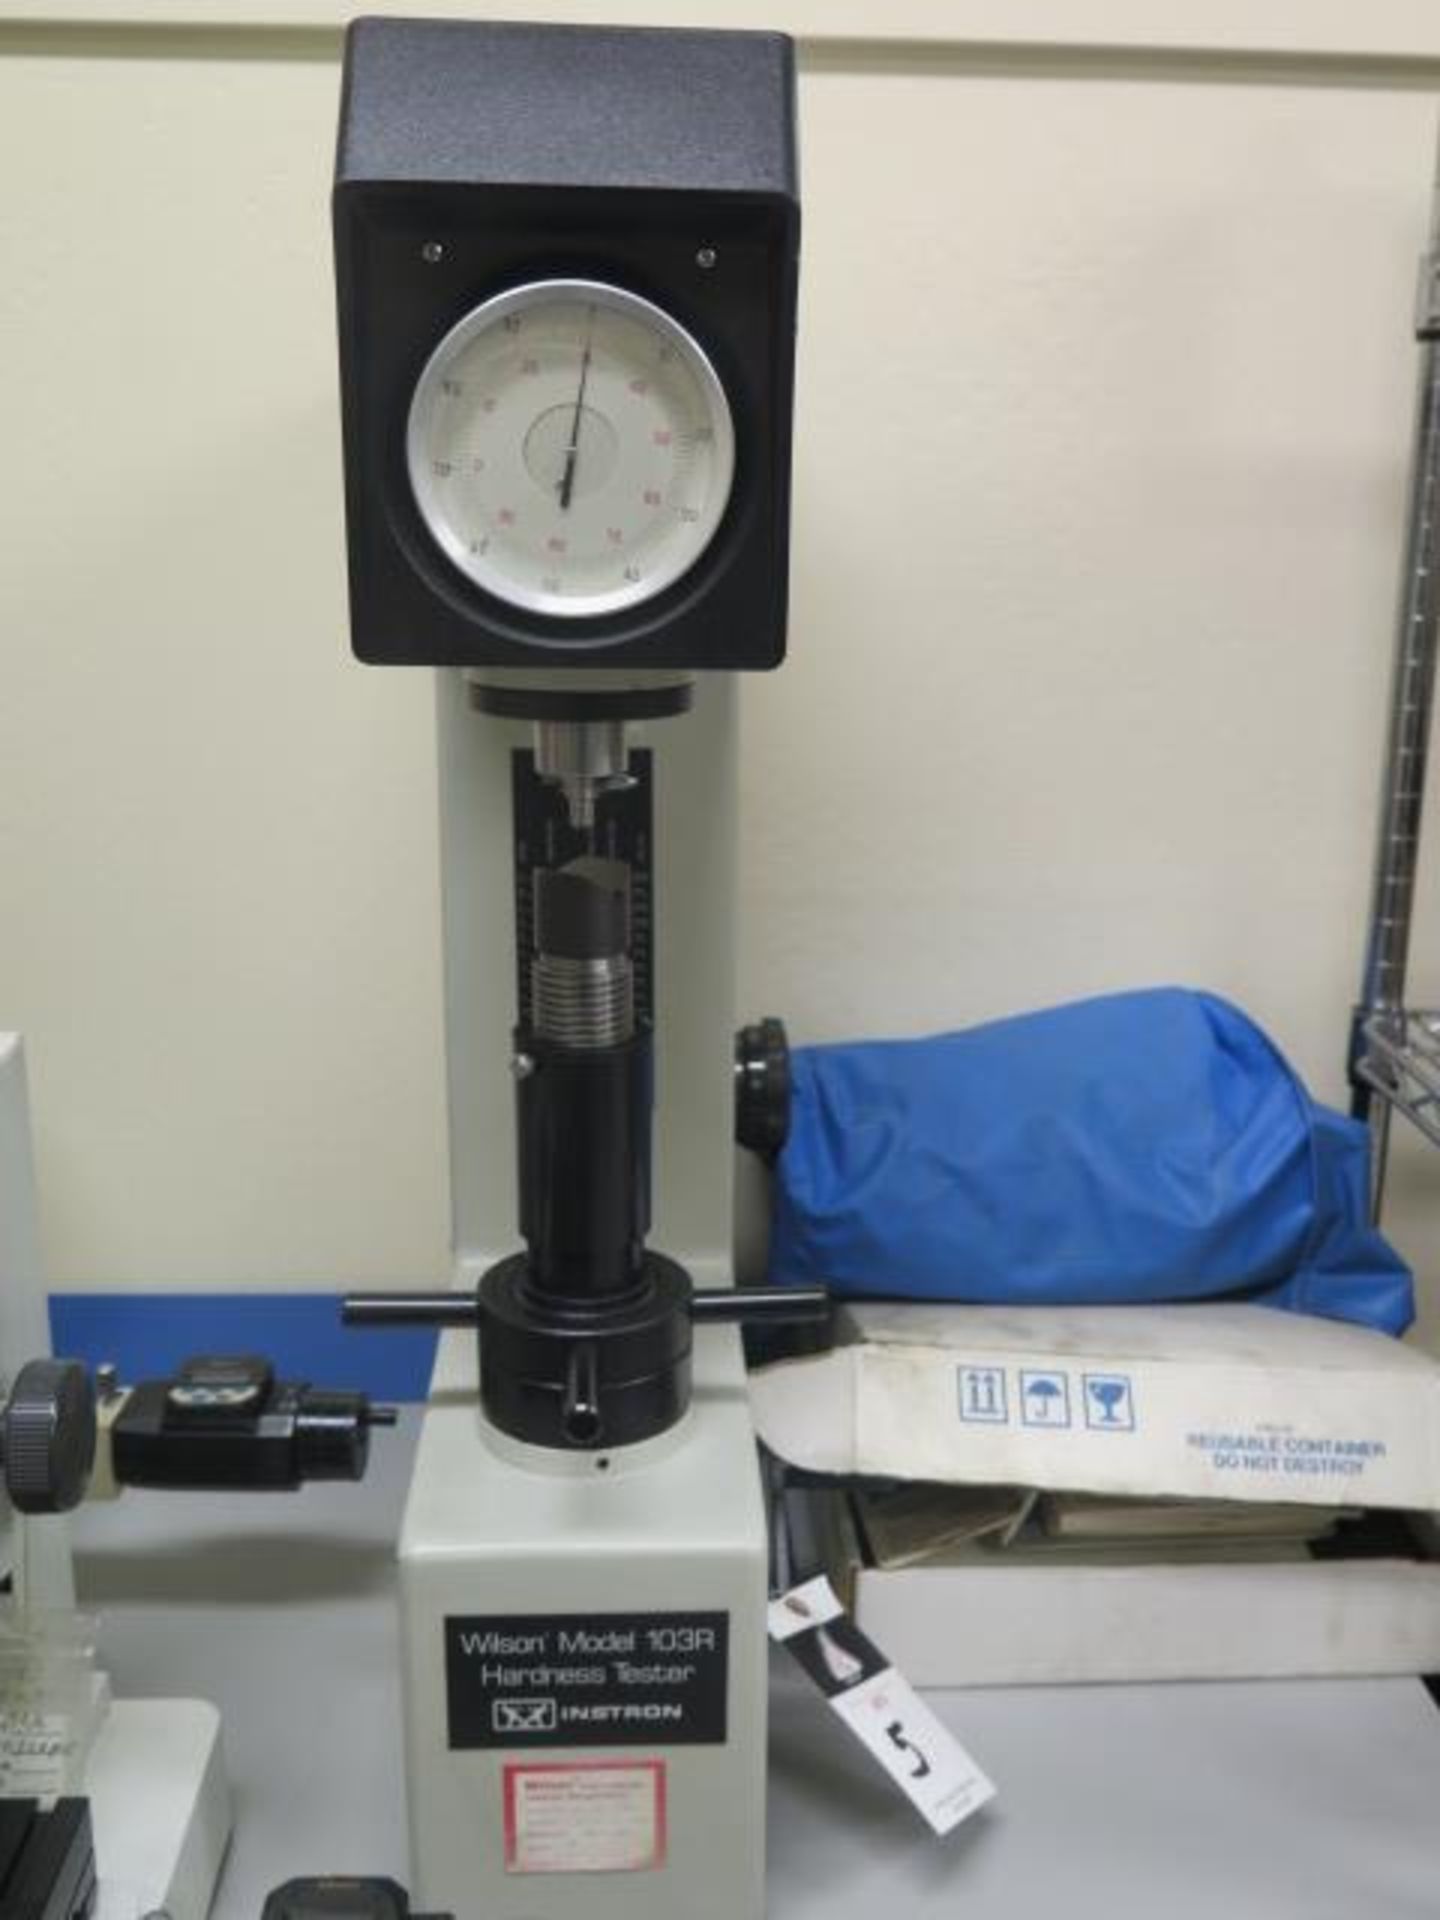 Wilson Instron mdl. 103R Rockwell Hardness Tester s/n 2523 (SOLD AS-IS - NO WARRANTY) - Image 2 of 7